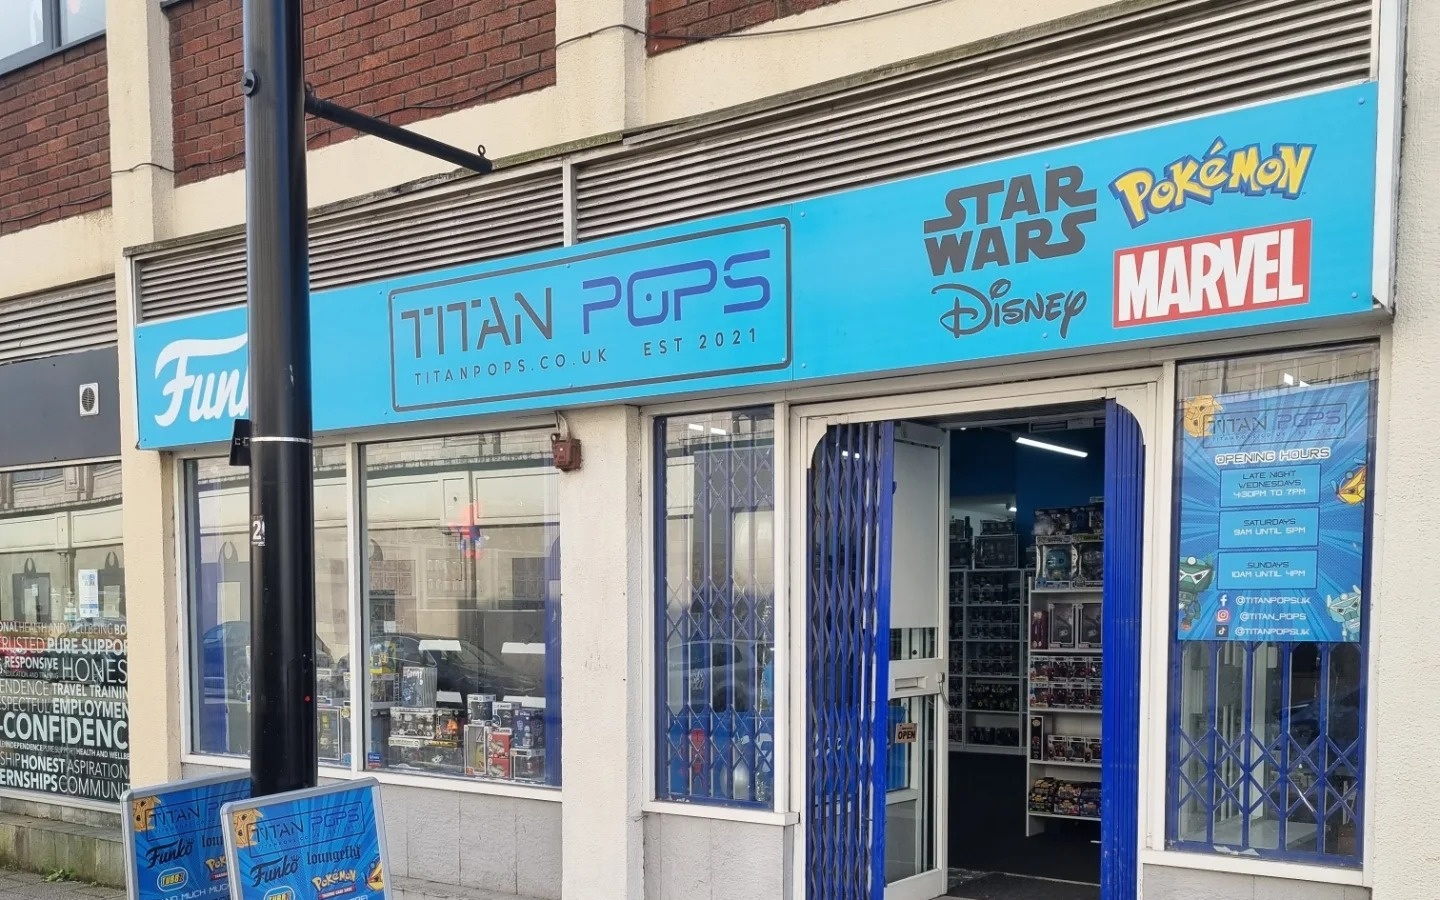 New Funko Pops shops opens up in Stockport town centre